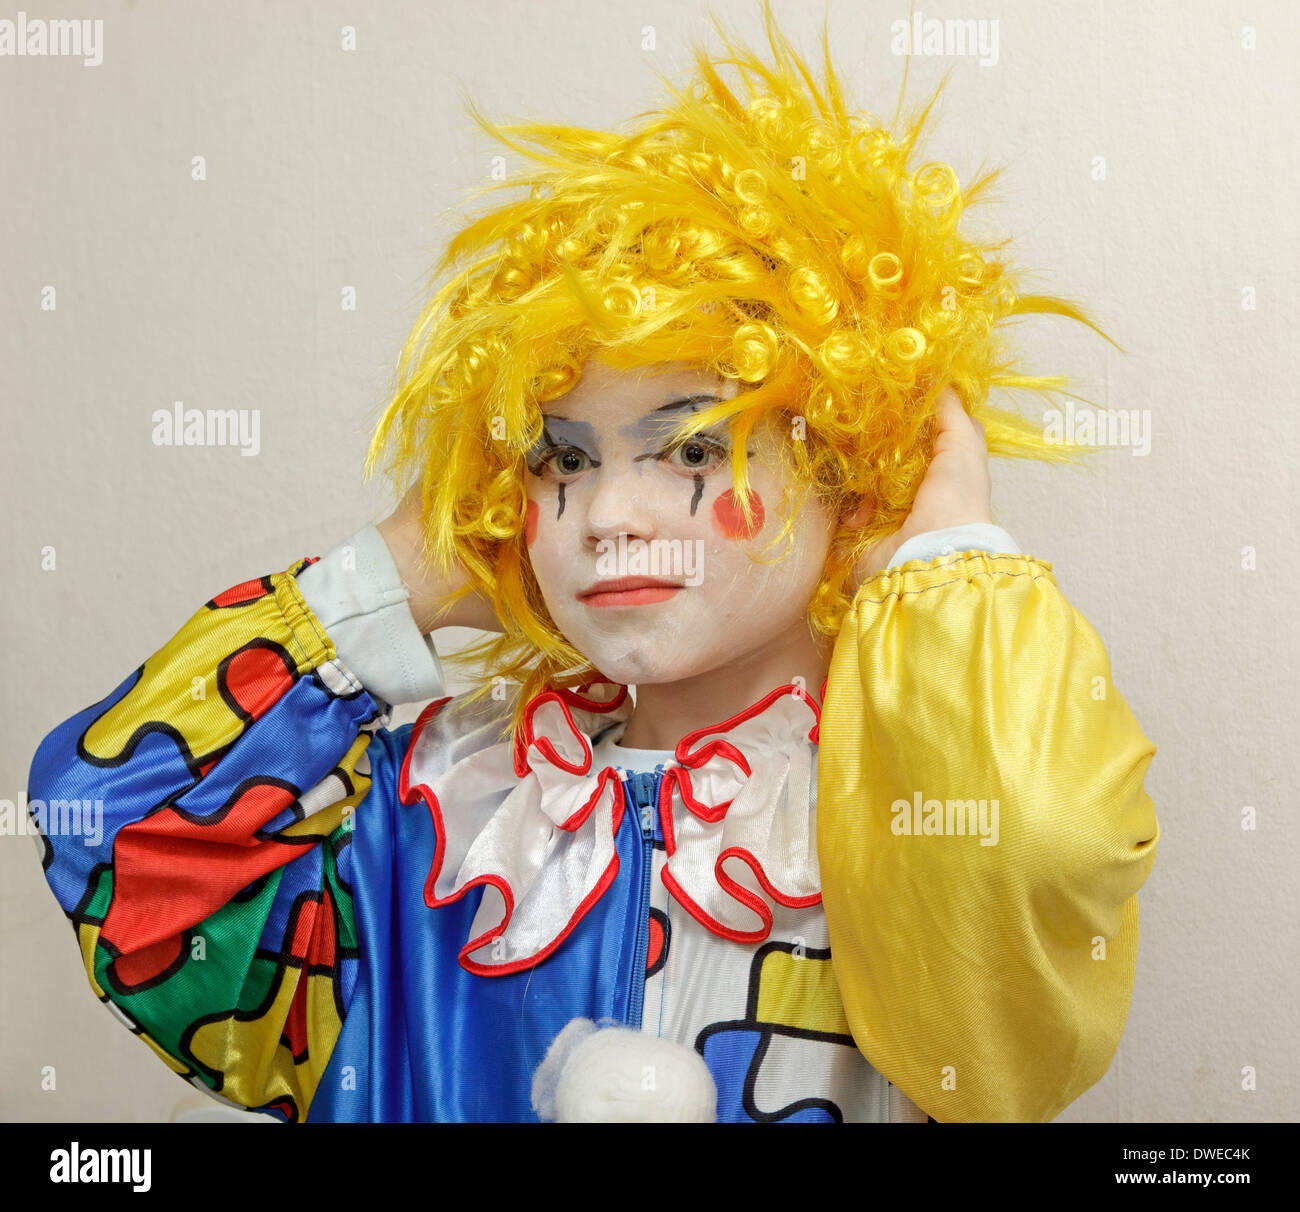 young boy dressed up as a clown Stock Photo